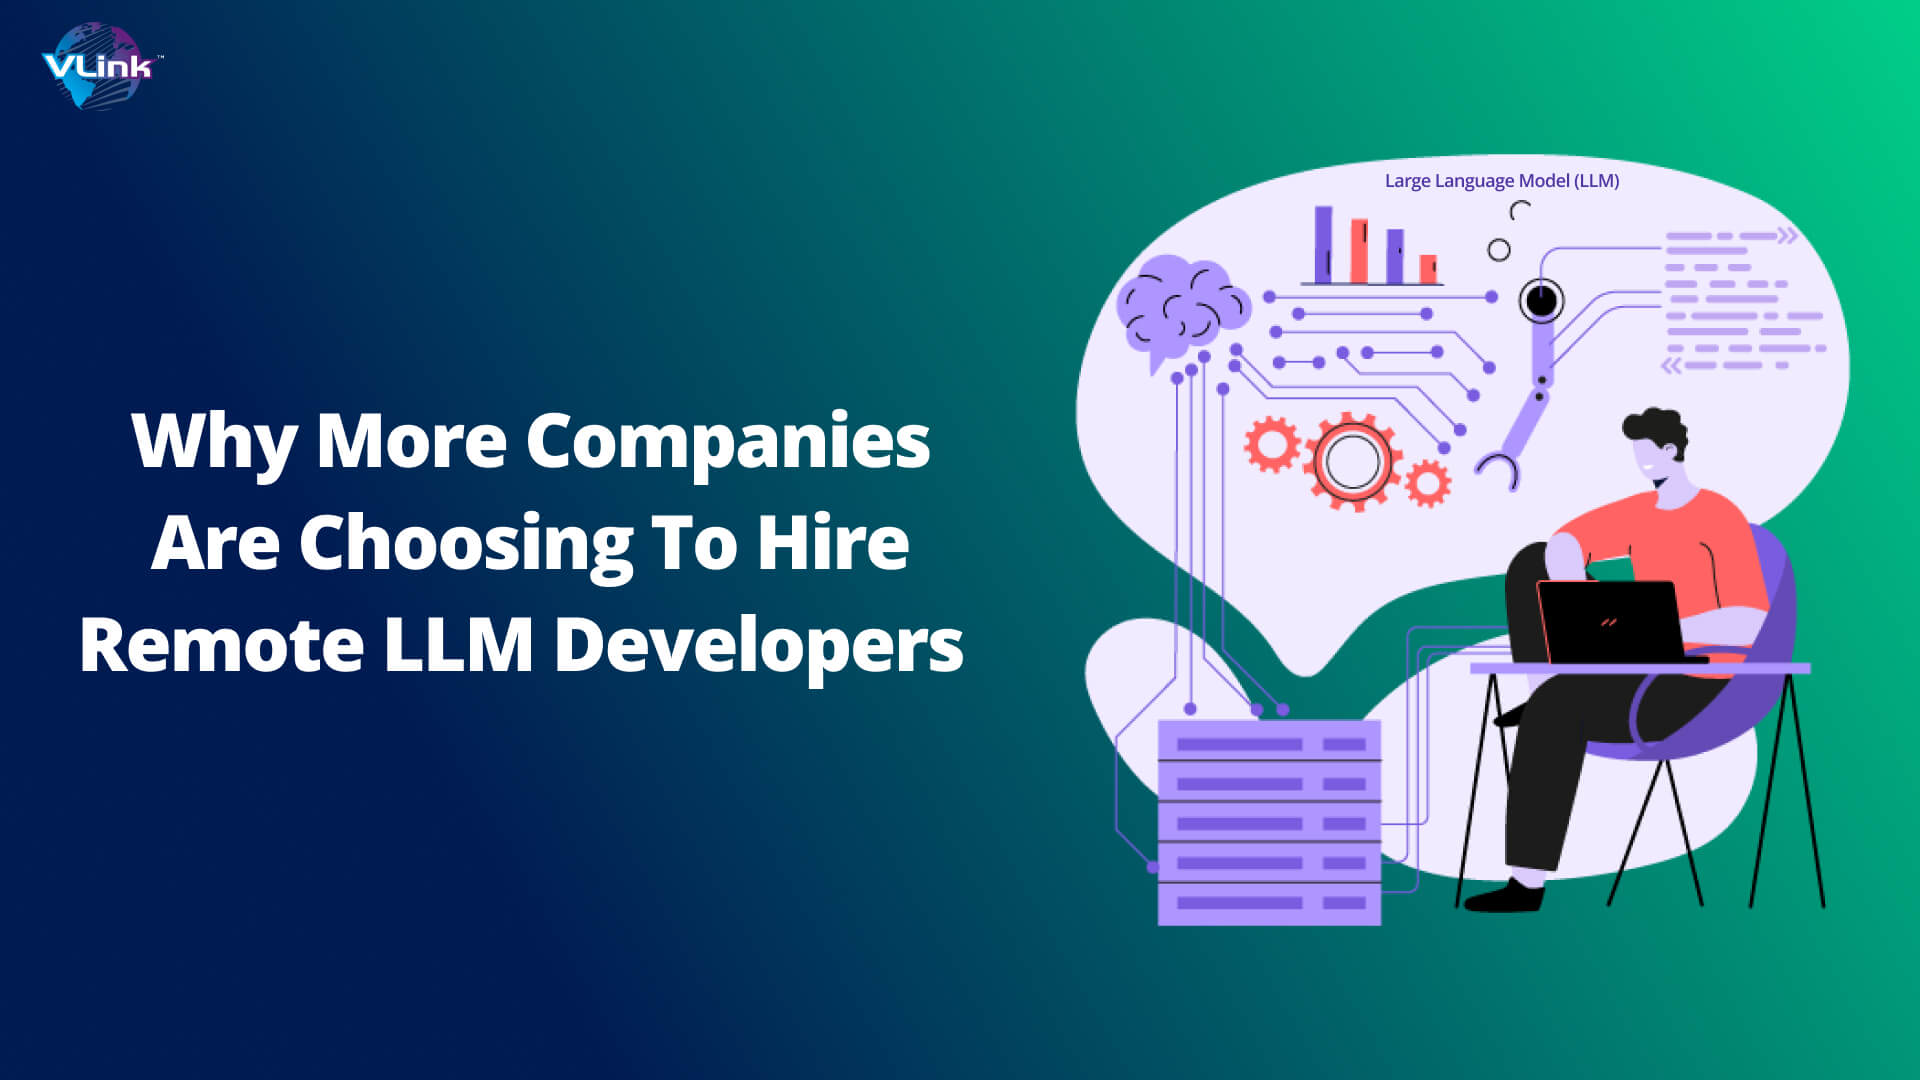 Why More Companies Are Choosing to Hire Remote LLM Developers